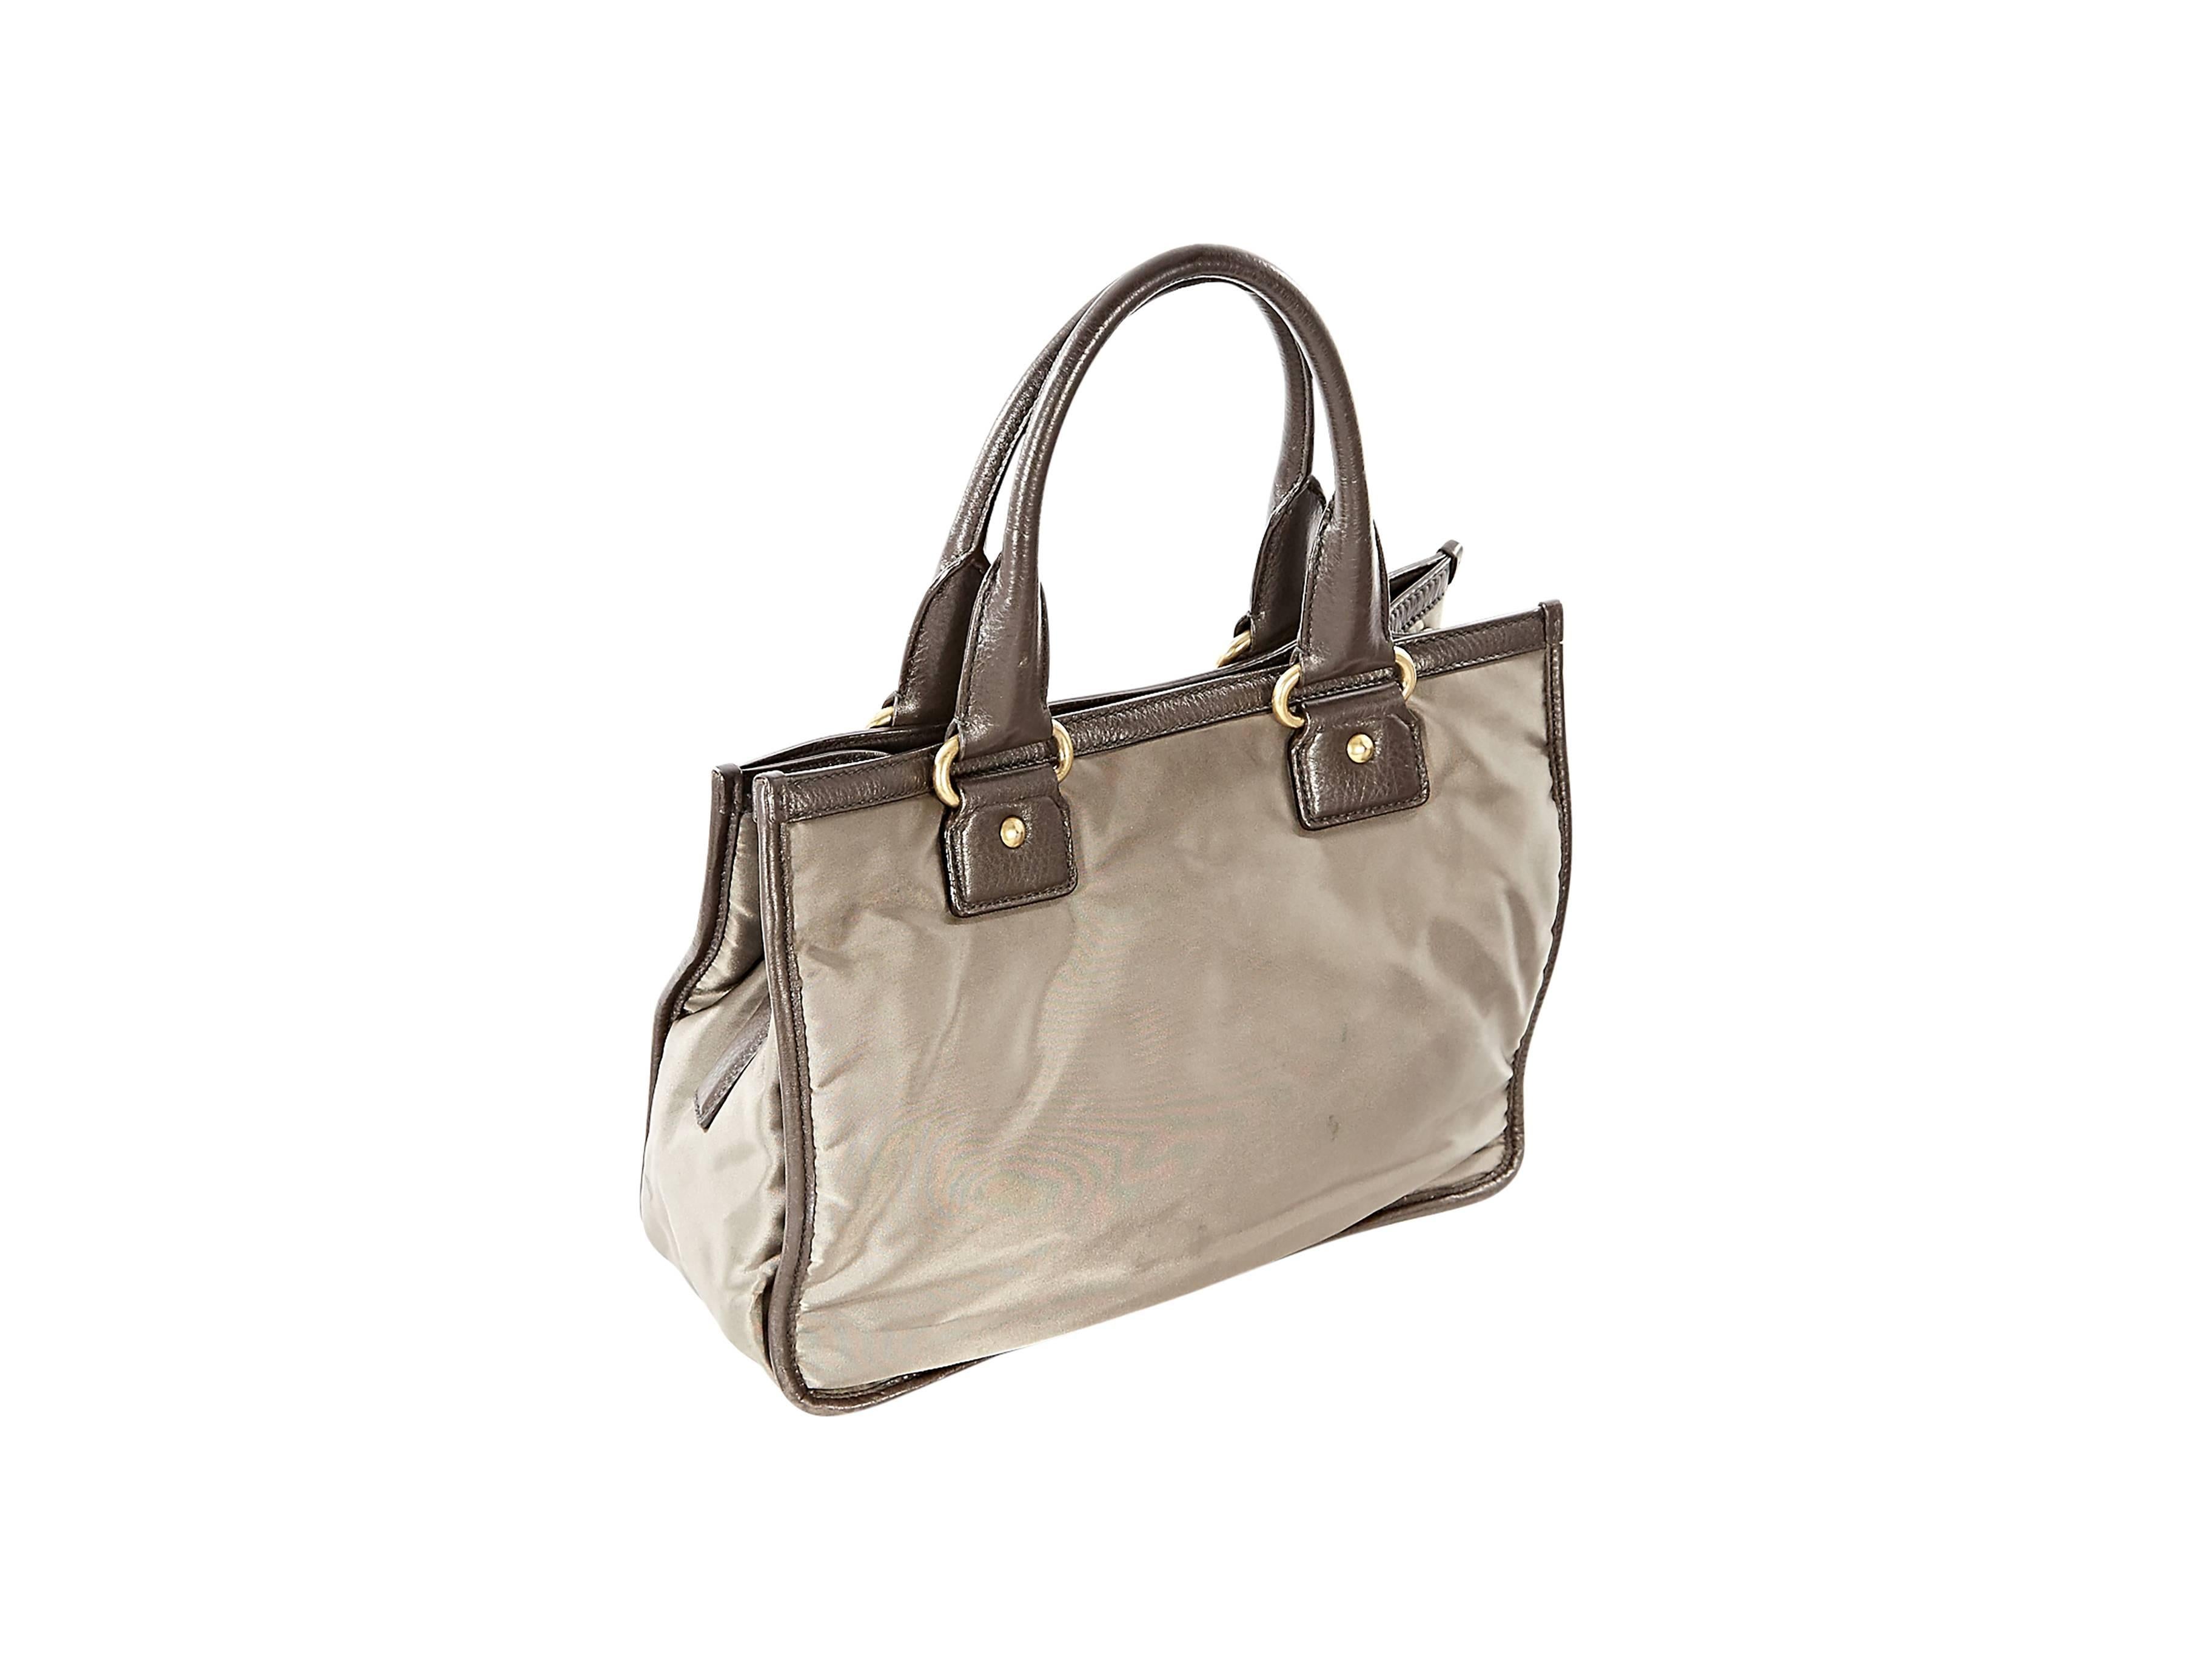 Taupe fabric tote bag by Prada.  Logo design accents front.  Trimmed with brown leather.  Tote carry handles.  Snap tab closure.  Lined interior with zip pockets.  Protective metal feet.  Goldtone hardware.  13